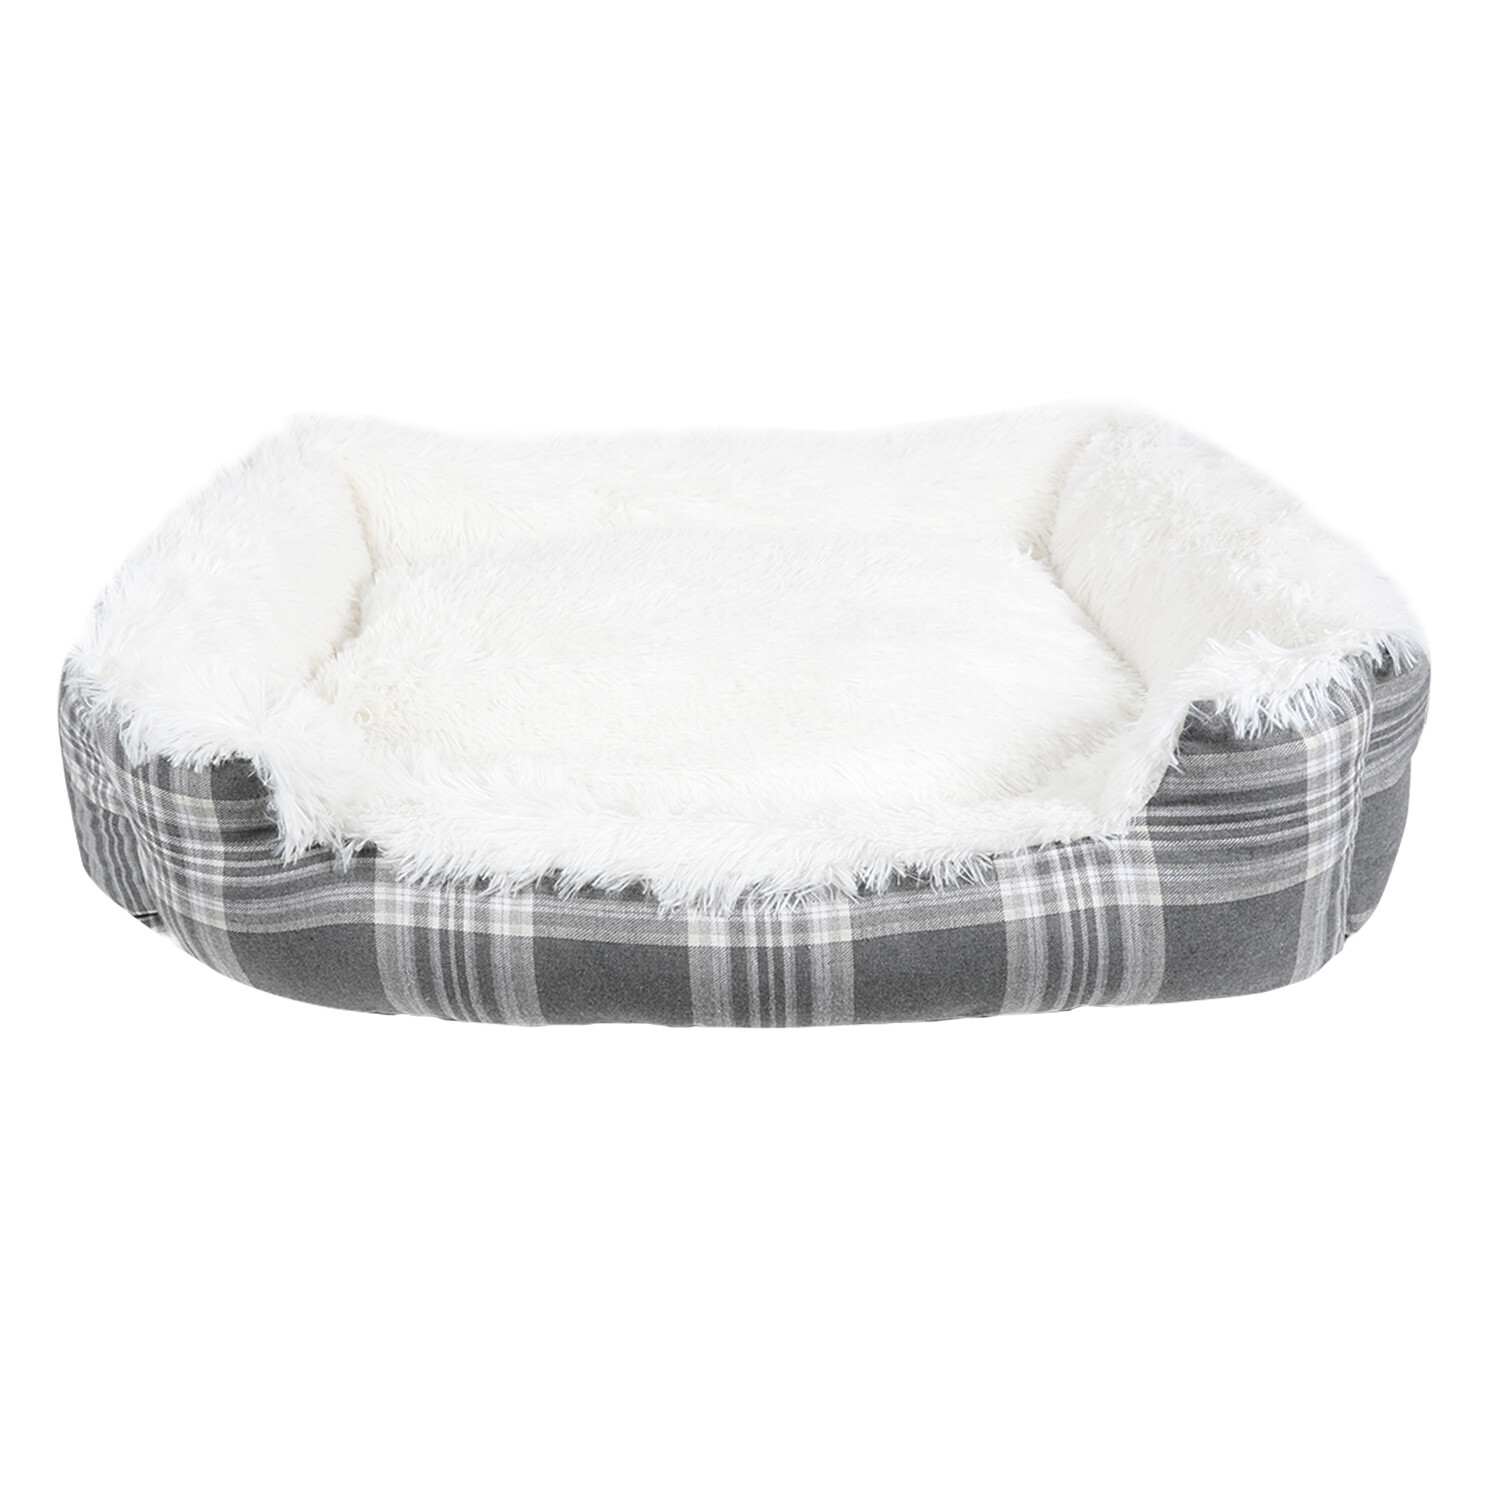 Clever Paws Medium Grey Check Super Fluffy Pet Bed Image 1